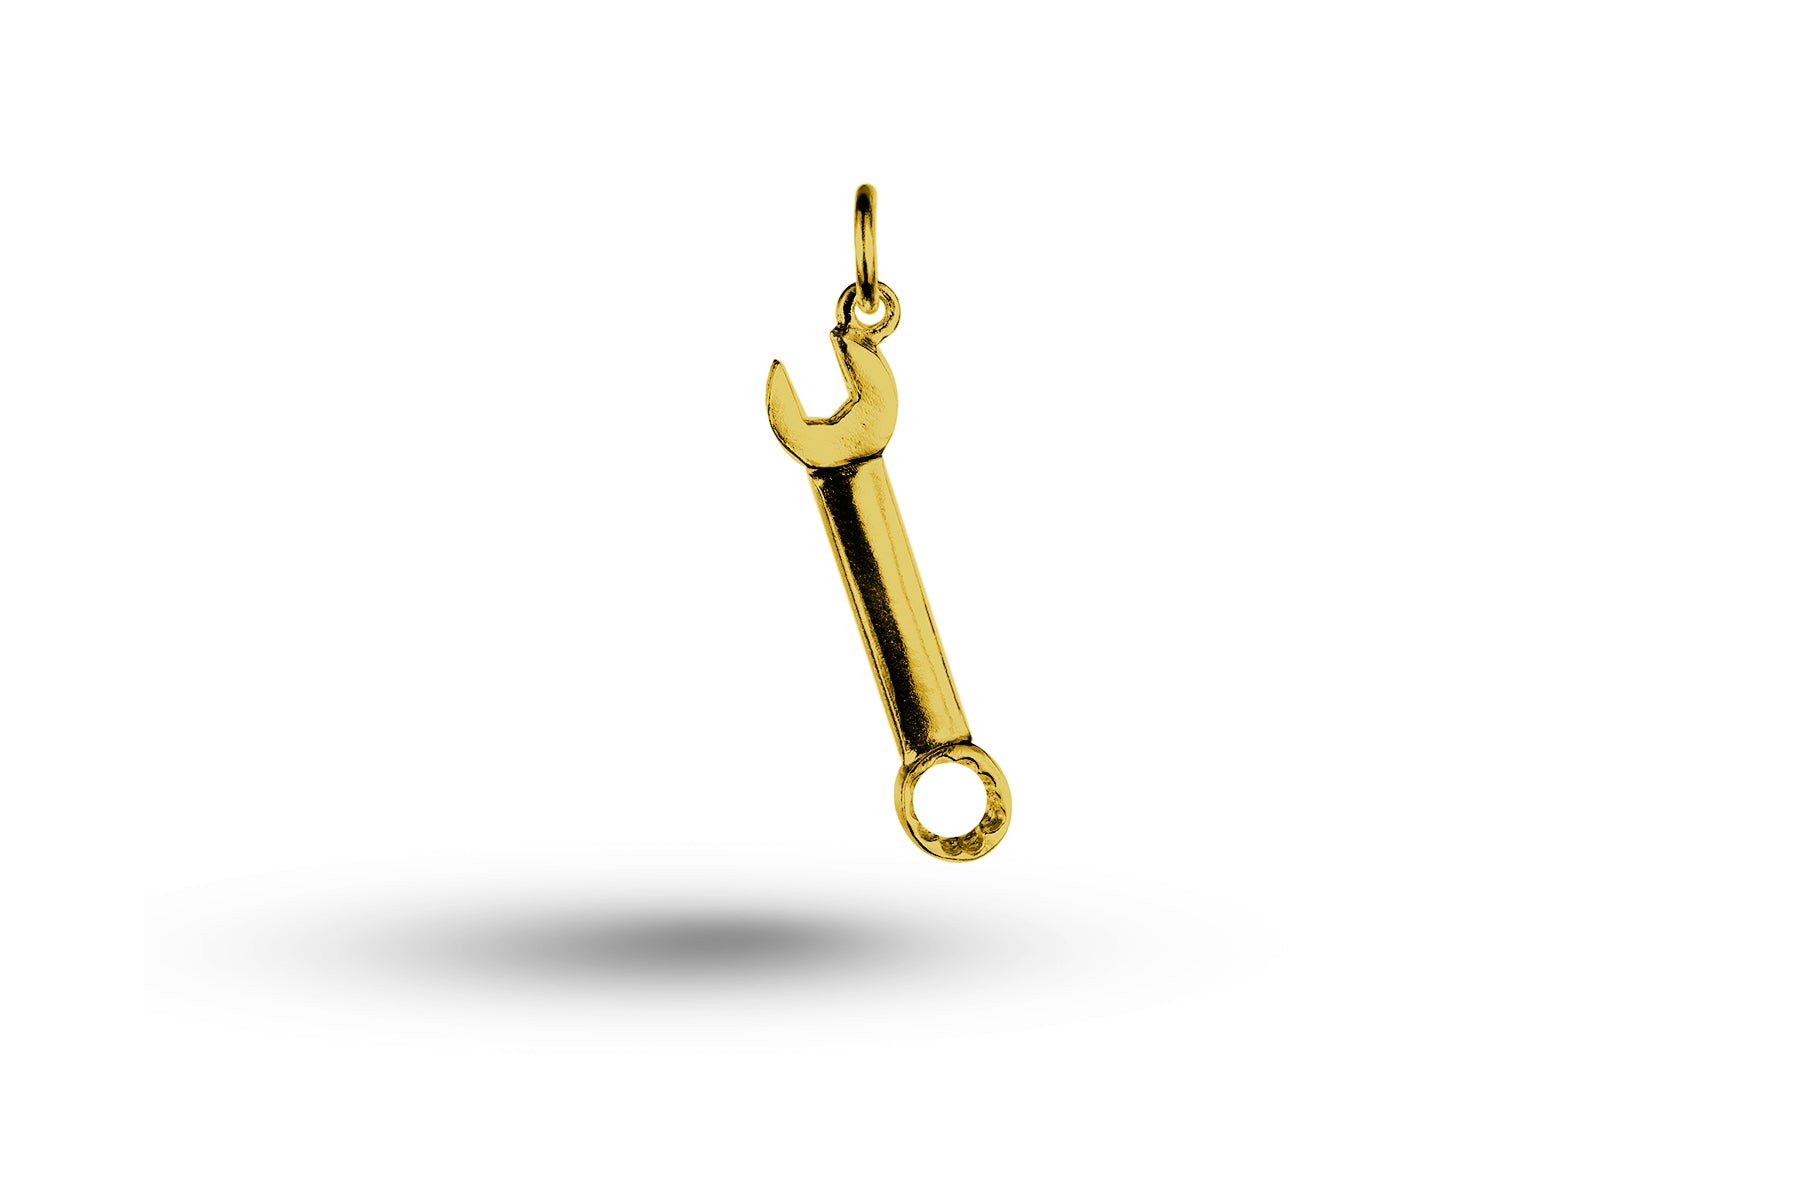 Yellow gold Ring Spanner charm.